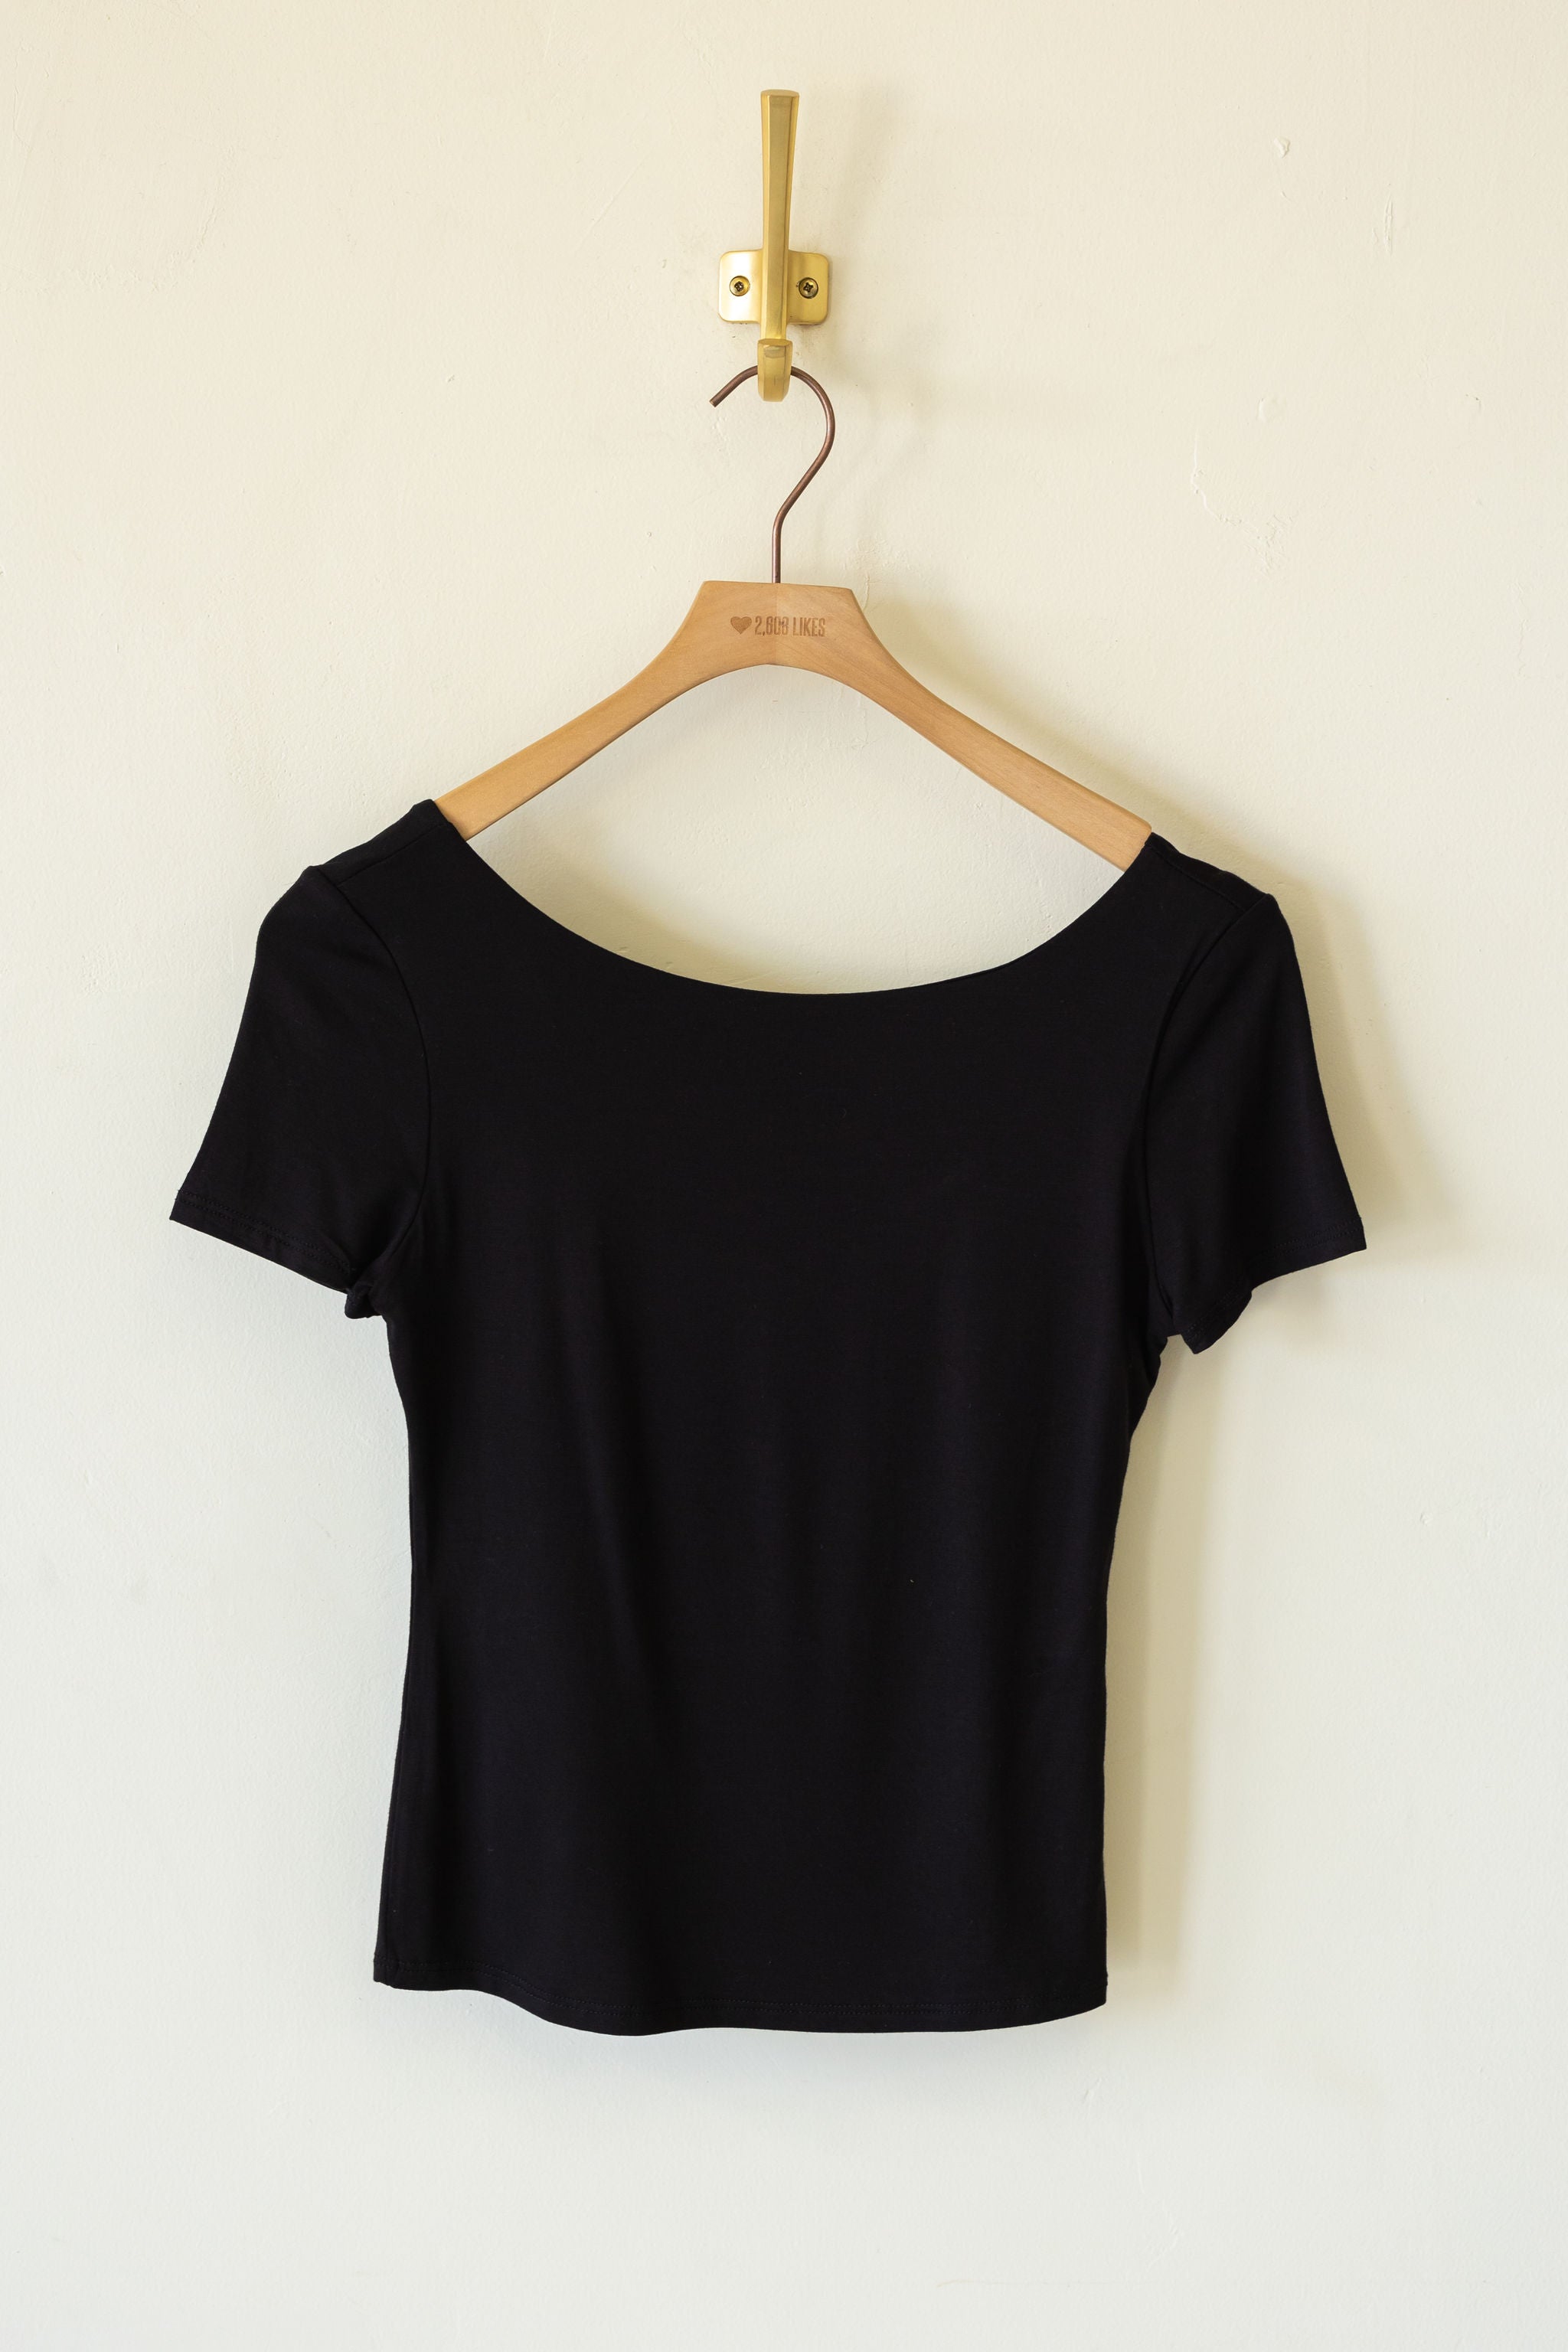 Meet Up Short Sleeve Top by For Good